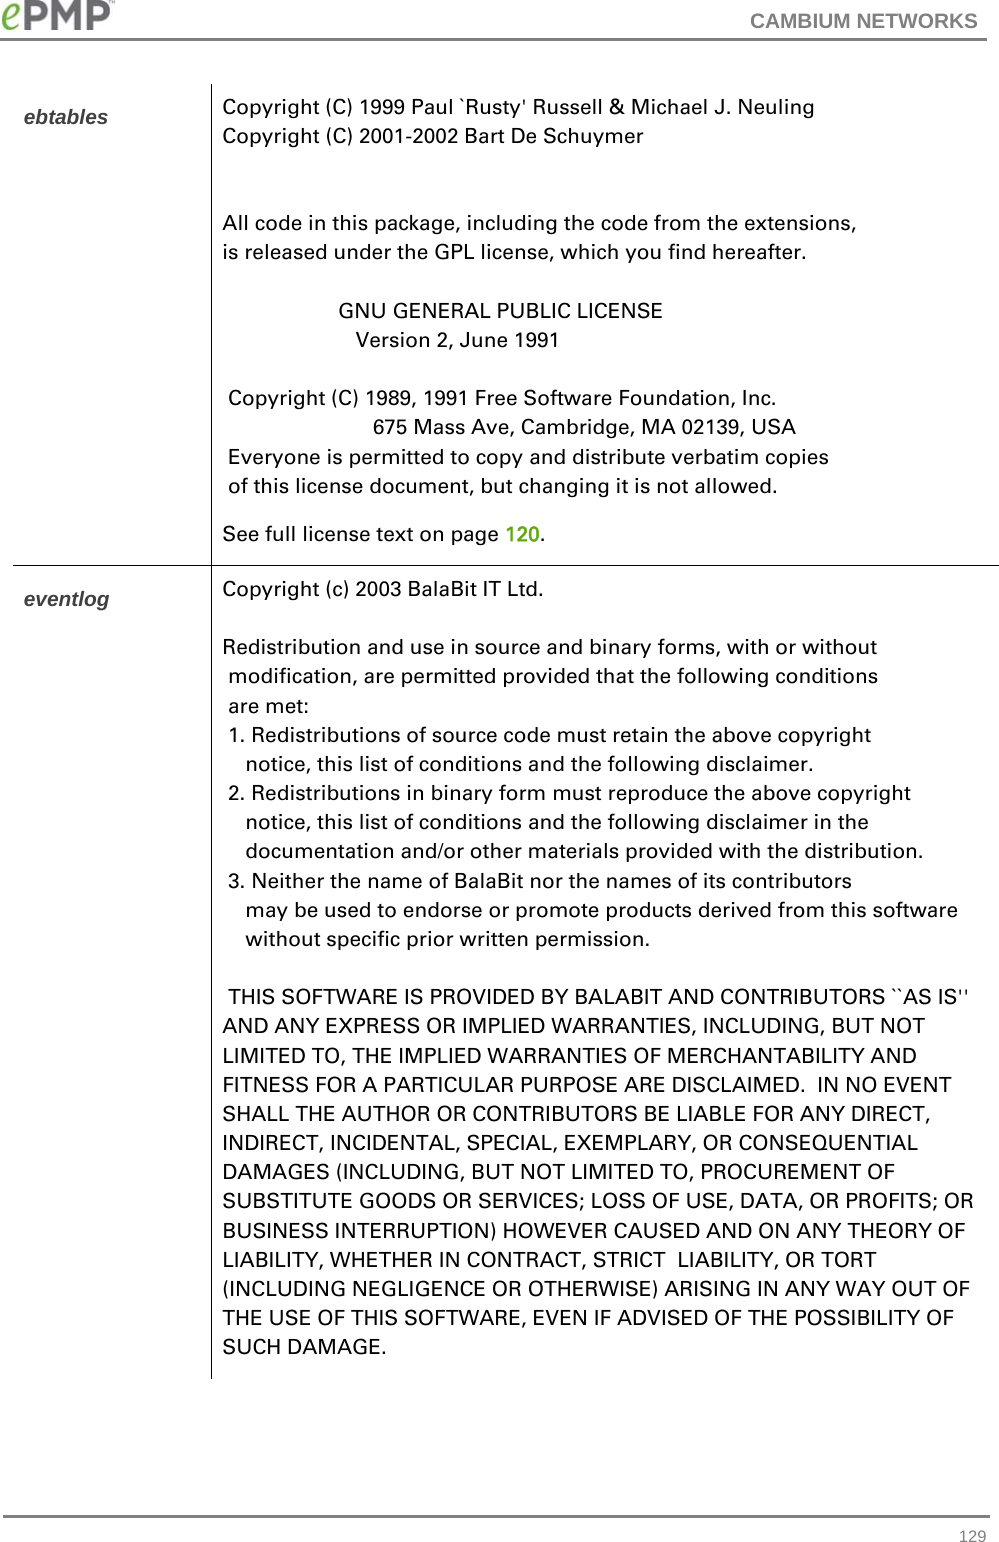 CAMBIUM NETWORKS   129ebtables  Copyright (C) 1999 Paul `Rusty&apos; Russell &amp; Michael J. Neuling Copyright (C) 2001-2002 Bart De Schuymer   All code in this package, including the code from the extensions, is released under the GPL license, which you find hereafter.                      GNU GENERAL PUBLIC LICENSE                        Version 2, June 1991   Copyright (C) 1989, 1991 Free Software Foundation, Inc.                           675 Mass Ave, Cambridge, MA 02139, USA  Everyone is permitted to copy and distribute verbatim copies  of this license document, but changing it is not allowed. See full license text on page 120. eventlog  Copyright (c) 2003 BalaBit IT Ltd.  Redistribution and use in source and binary forms, with or without  modification, are permitted provided that the following conditions  are met:  1. Redistributions of source code must retain the above copyright     notice, this list of conditions and the following disclaimer.  2. Redistributions in binary form must reproduce the above copyright     notice, this list of conditions and the following disclaimer in the     documentation and/or other materials provided with the distribution.  3. Neither the name of BalaBit nor the names of its contributors     may be used to endorse or promote products derived from this software     without specific prior written permission.   THIS SOFTWARE IS PROVIDED BY BALABIT AND CONTRIBUTORS ``AS IS&apos;&apos; AND ANY EXPRESS OR IMPLIED WARRANTIES, INCLUDING, BUT NOT LIMITED TO, THE IMPLIED WARRANTIES OF MERCHANTABILITY AND FITNESS FOR A PARTICULAR PURPOSE ARE DISCLAIMED.  IN NO EVENT SHALL THE AUTHOR OR CONTRIBUTORS BE LIABLE FOR ANY DIRECT, INDIRECT, INCIDENTAL, SPECIAL, EXEMPLARY, OR CONSEQUENTIAL DAMAGES (INCLUDING, BUT NOT LIMITED TO, PROCUREMENT OF SUBSTITUTE GOODS OR SERVICES; LOSS OF USE, DATA, OR PROFITS; OR BUSINESS INTERRUPTION) HOWEVER CAUSED AND ON ANY THEORY OF LIABILITY, WHETHER IN CONTRACT, STRICT  LIABILITY, OR TORT (INCLUDING NEGLIGENCE OR OTHERWISE) ARISING IN ANY WAY OUT OF THE USE OF THIS SOFTWARE, EVEN IF ADVISED OF THE POSSIBILITY OF SUCH DAMAGE. 